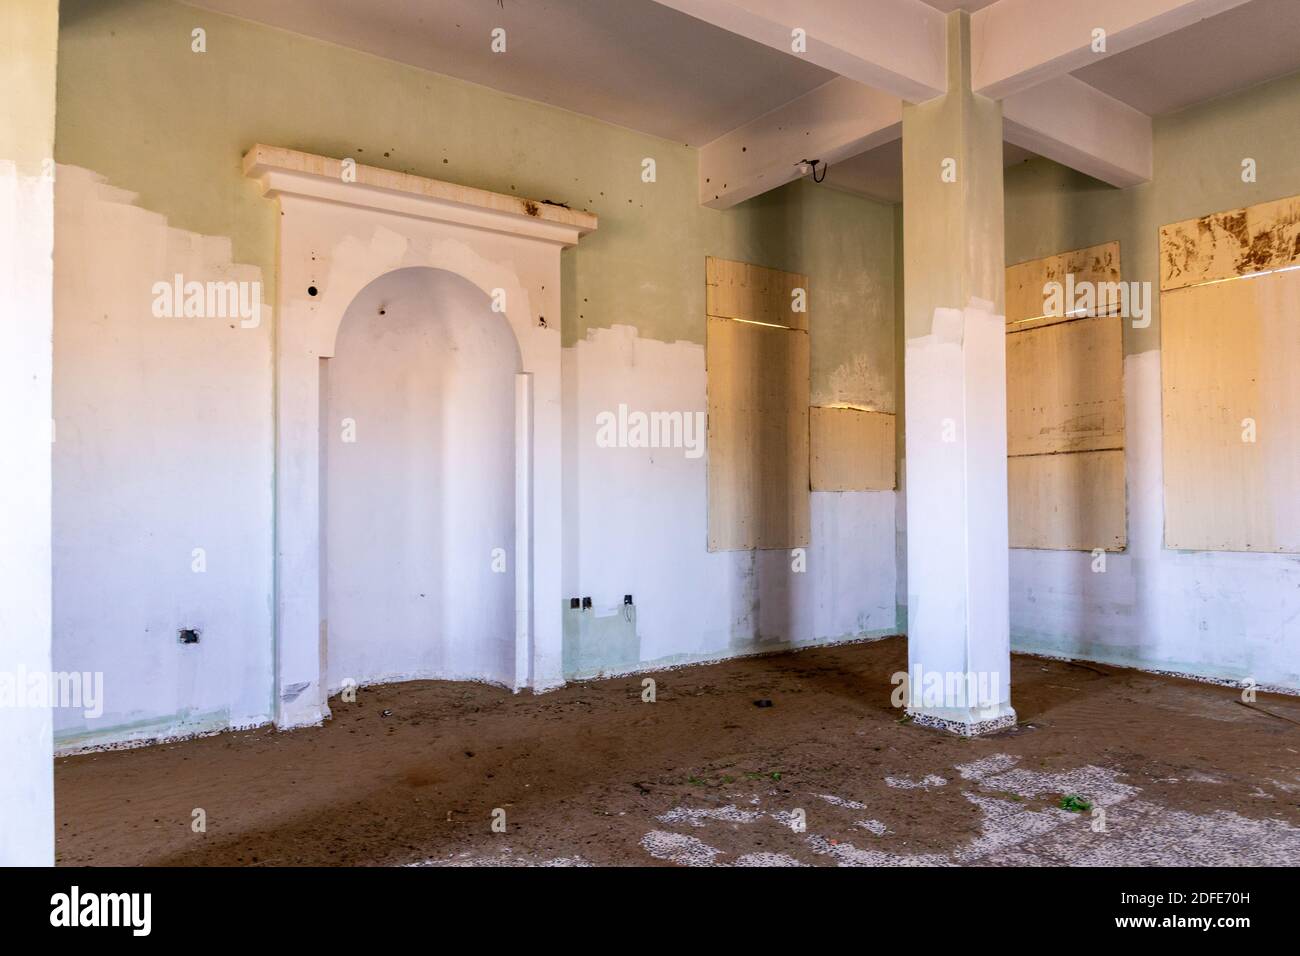 Demolished old mosque interior with qibla wall - mihrab (niche) in ghost village Al Madam in Sharjah, United Arab Emirates. Stock Photo